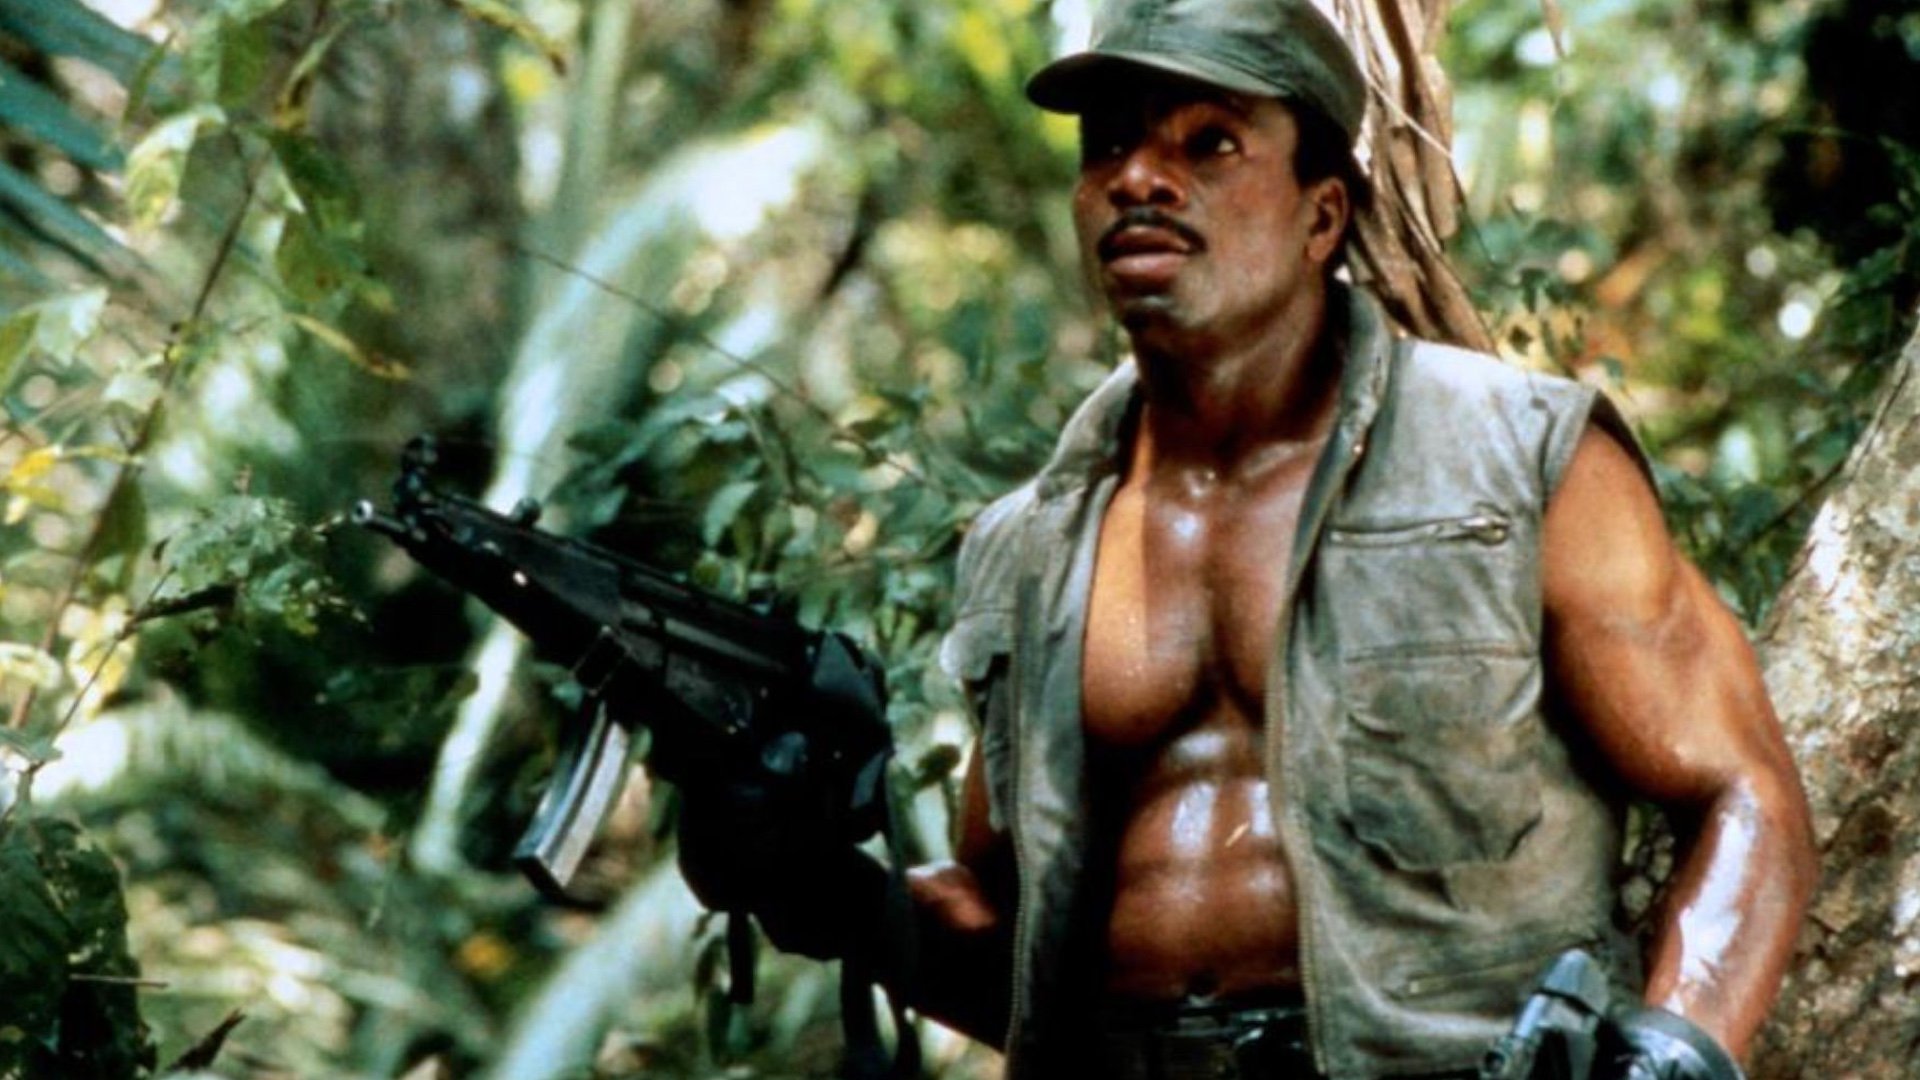 carl-weathers-talks-about-working-on-predator-and-how-it-was-a-constant-competition-to-look-badass.jpg